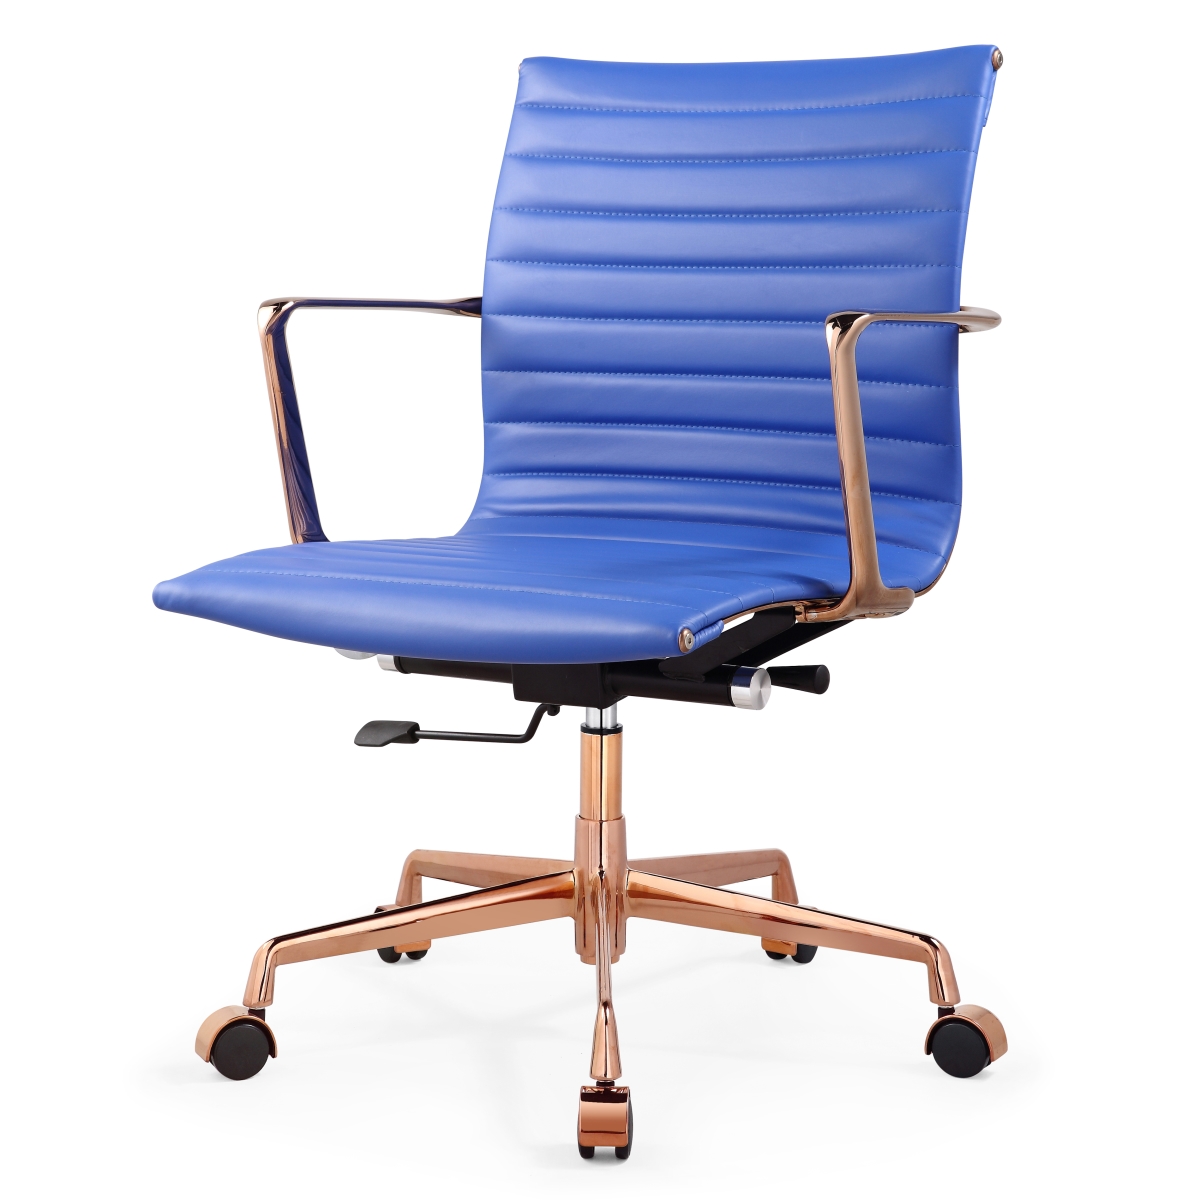 5-rg-cbl M5 Multipurpose Office Chair In Aniline Leather - Rose Gold & Blue